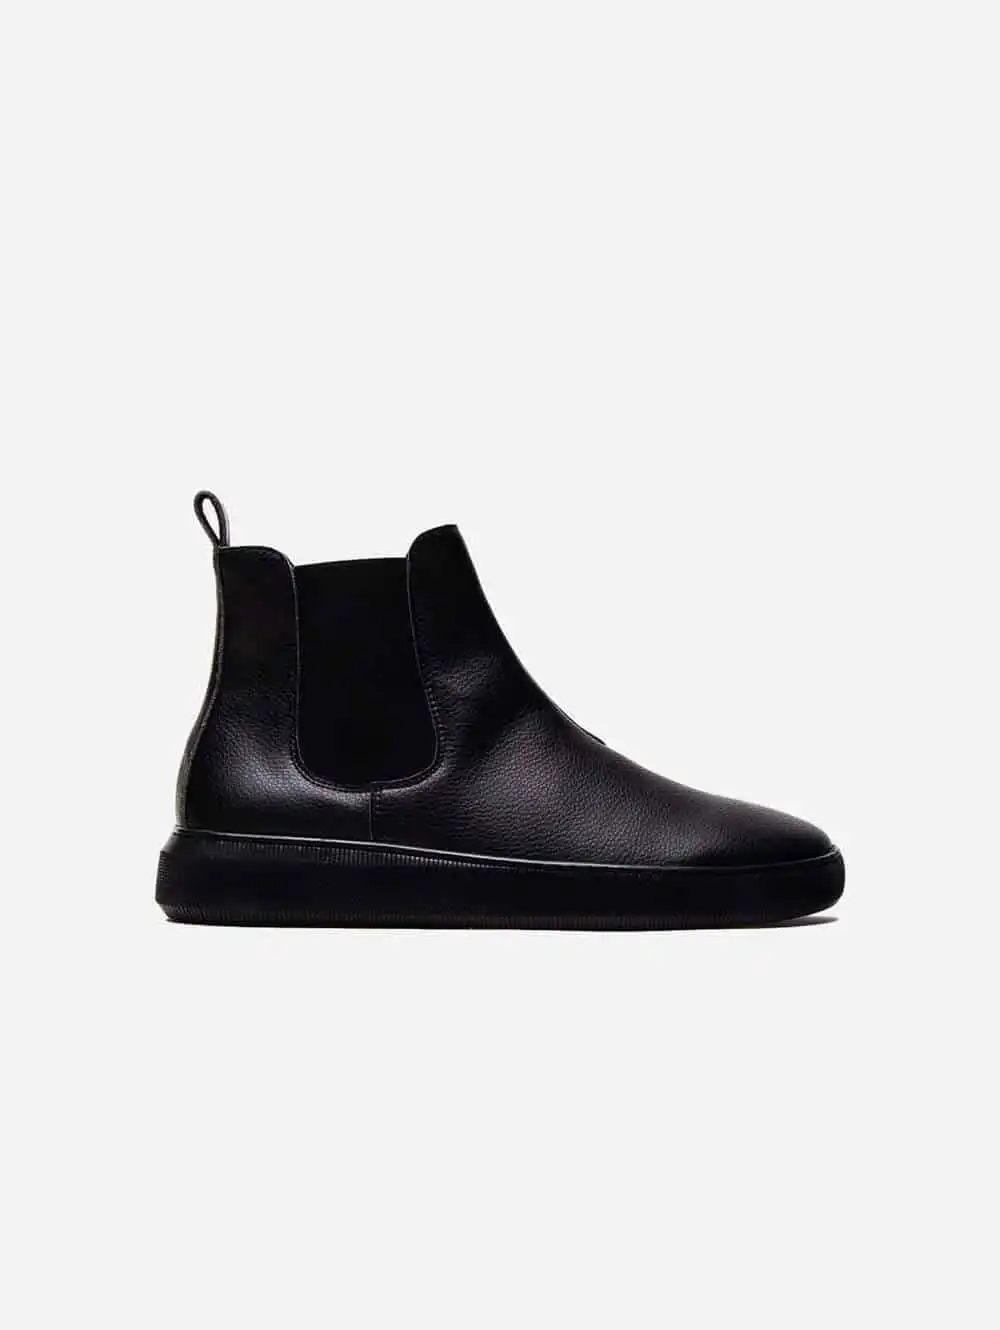 Humans Are Vain Mellby sustainable vegan Chelsea boots